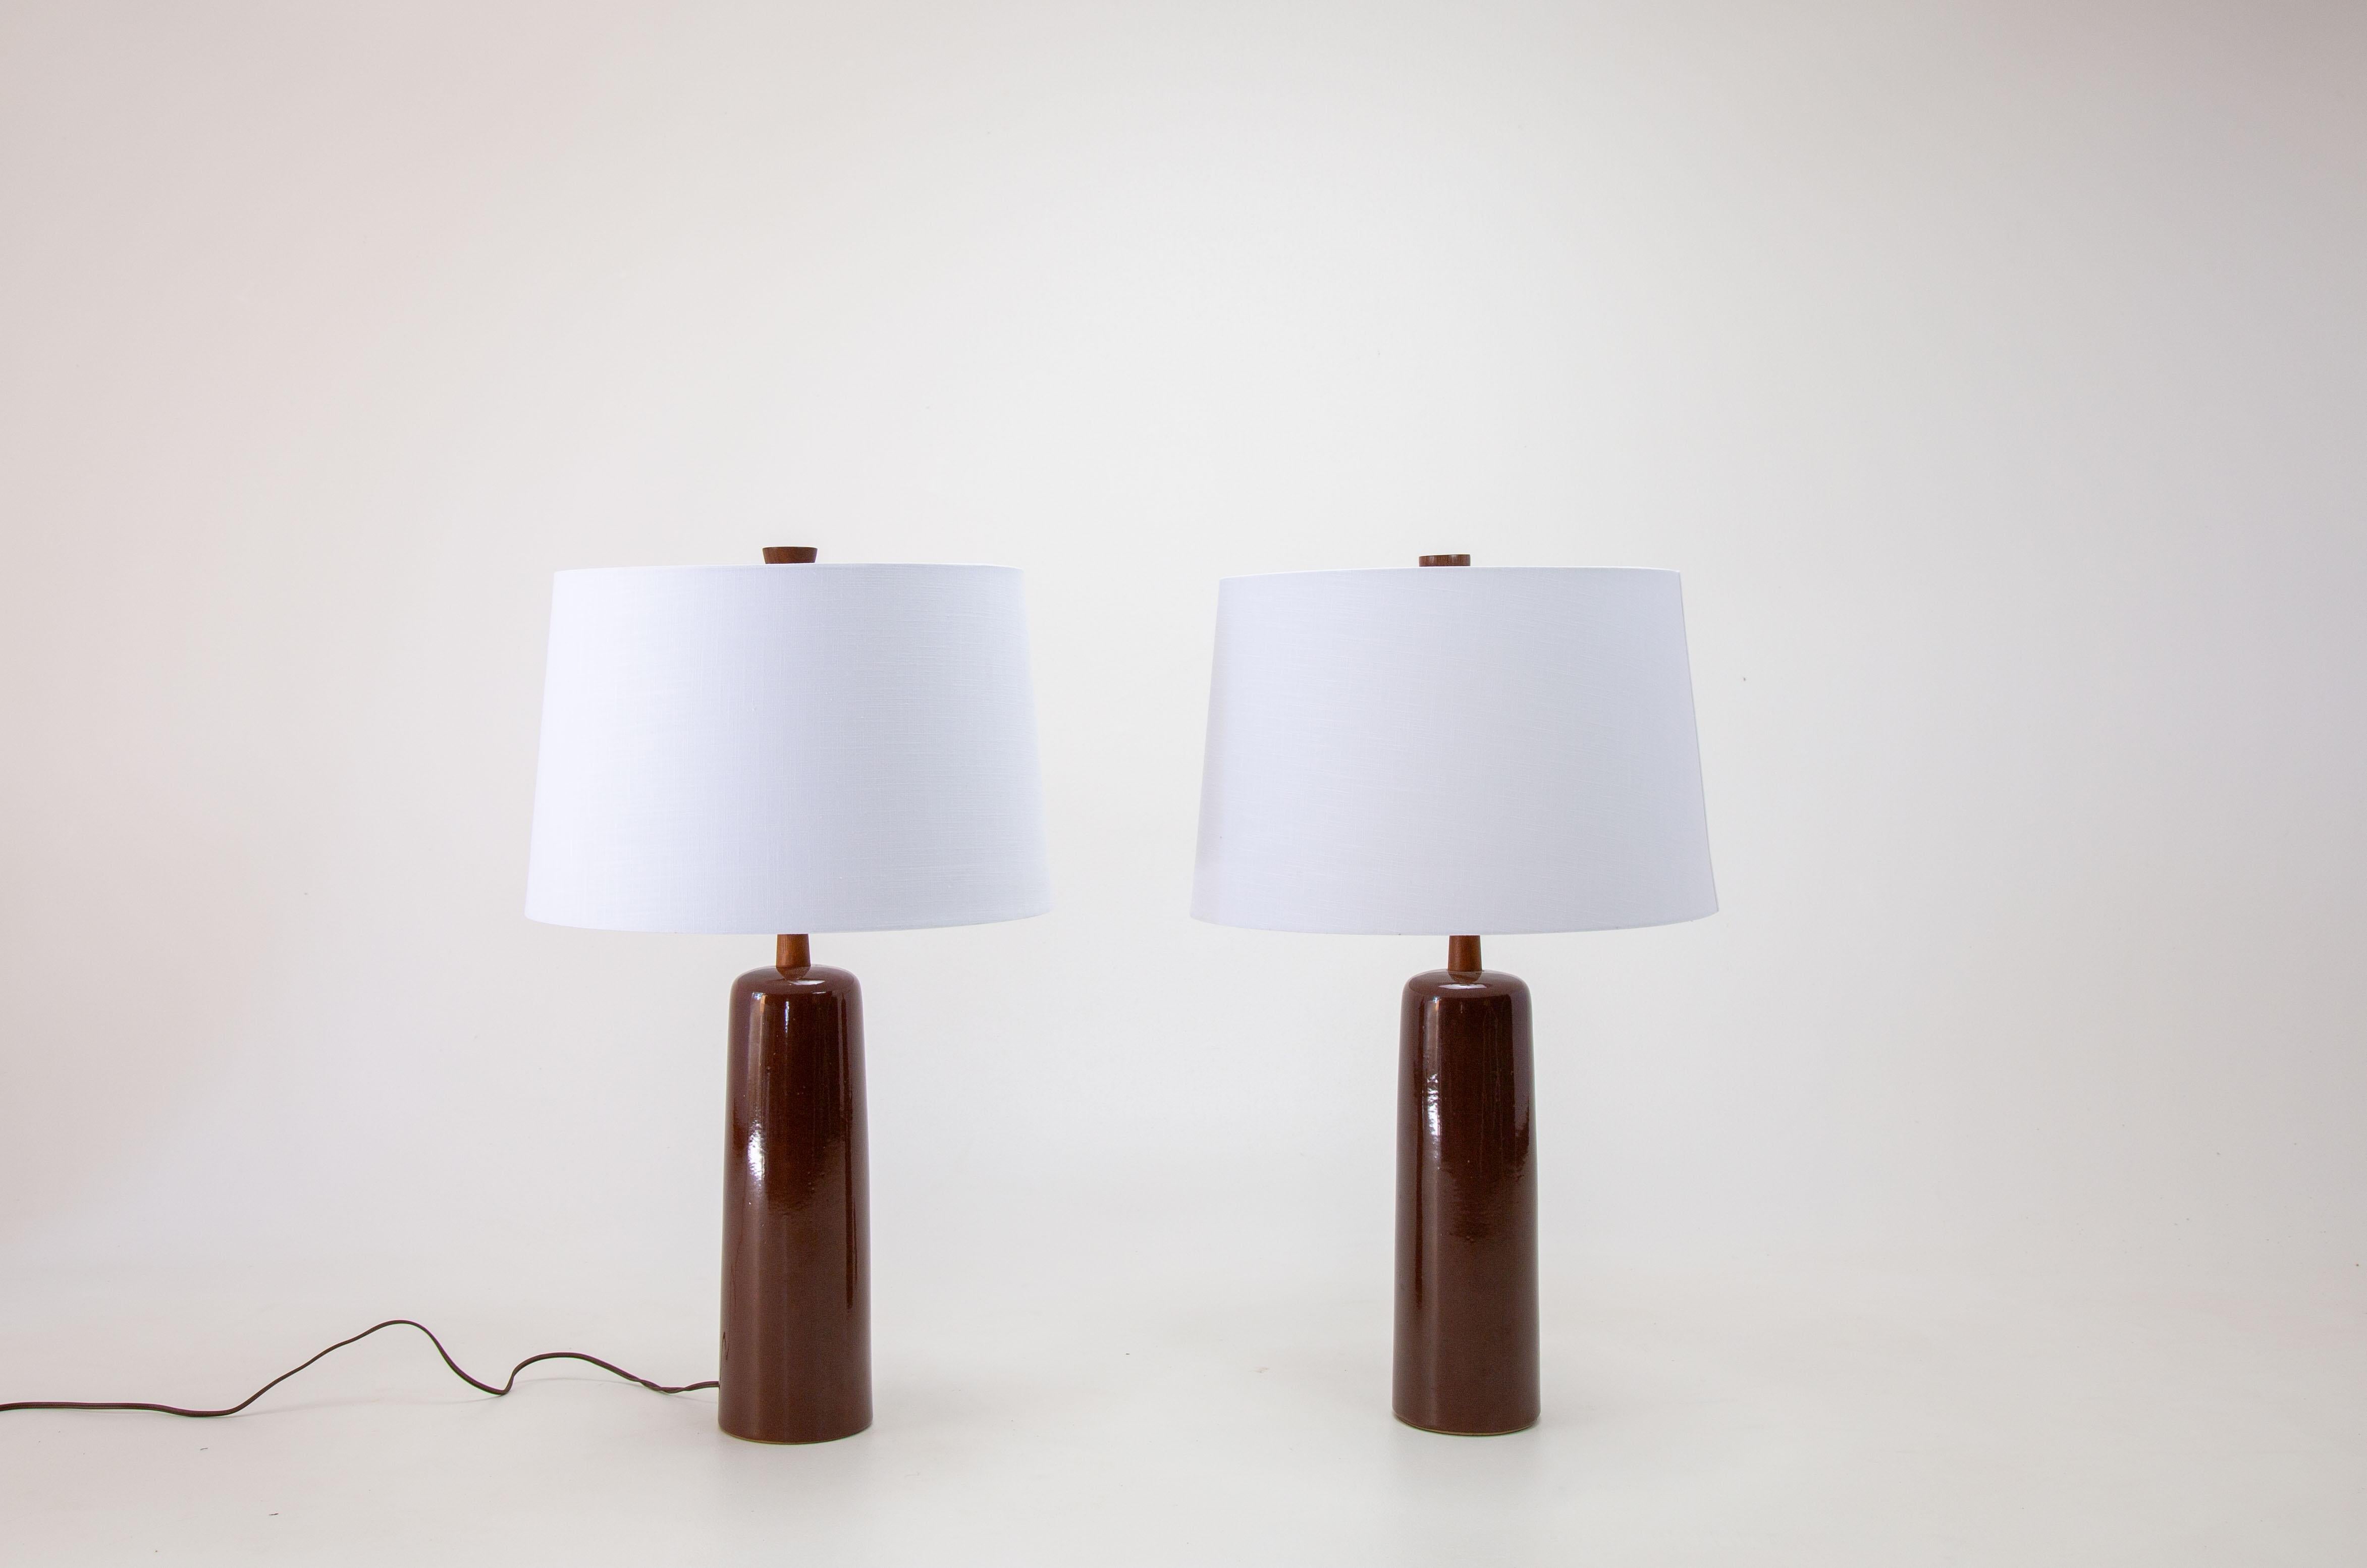 A highly collectable 1960s pair of table lamps designed by Jane and Gordon Martz of Marshall Studios in Veedersburg Indiana. These lamps are highly sought after and are showing up in designs all over the world. Blending sophistication and modern